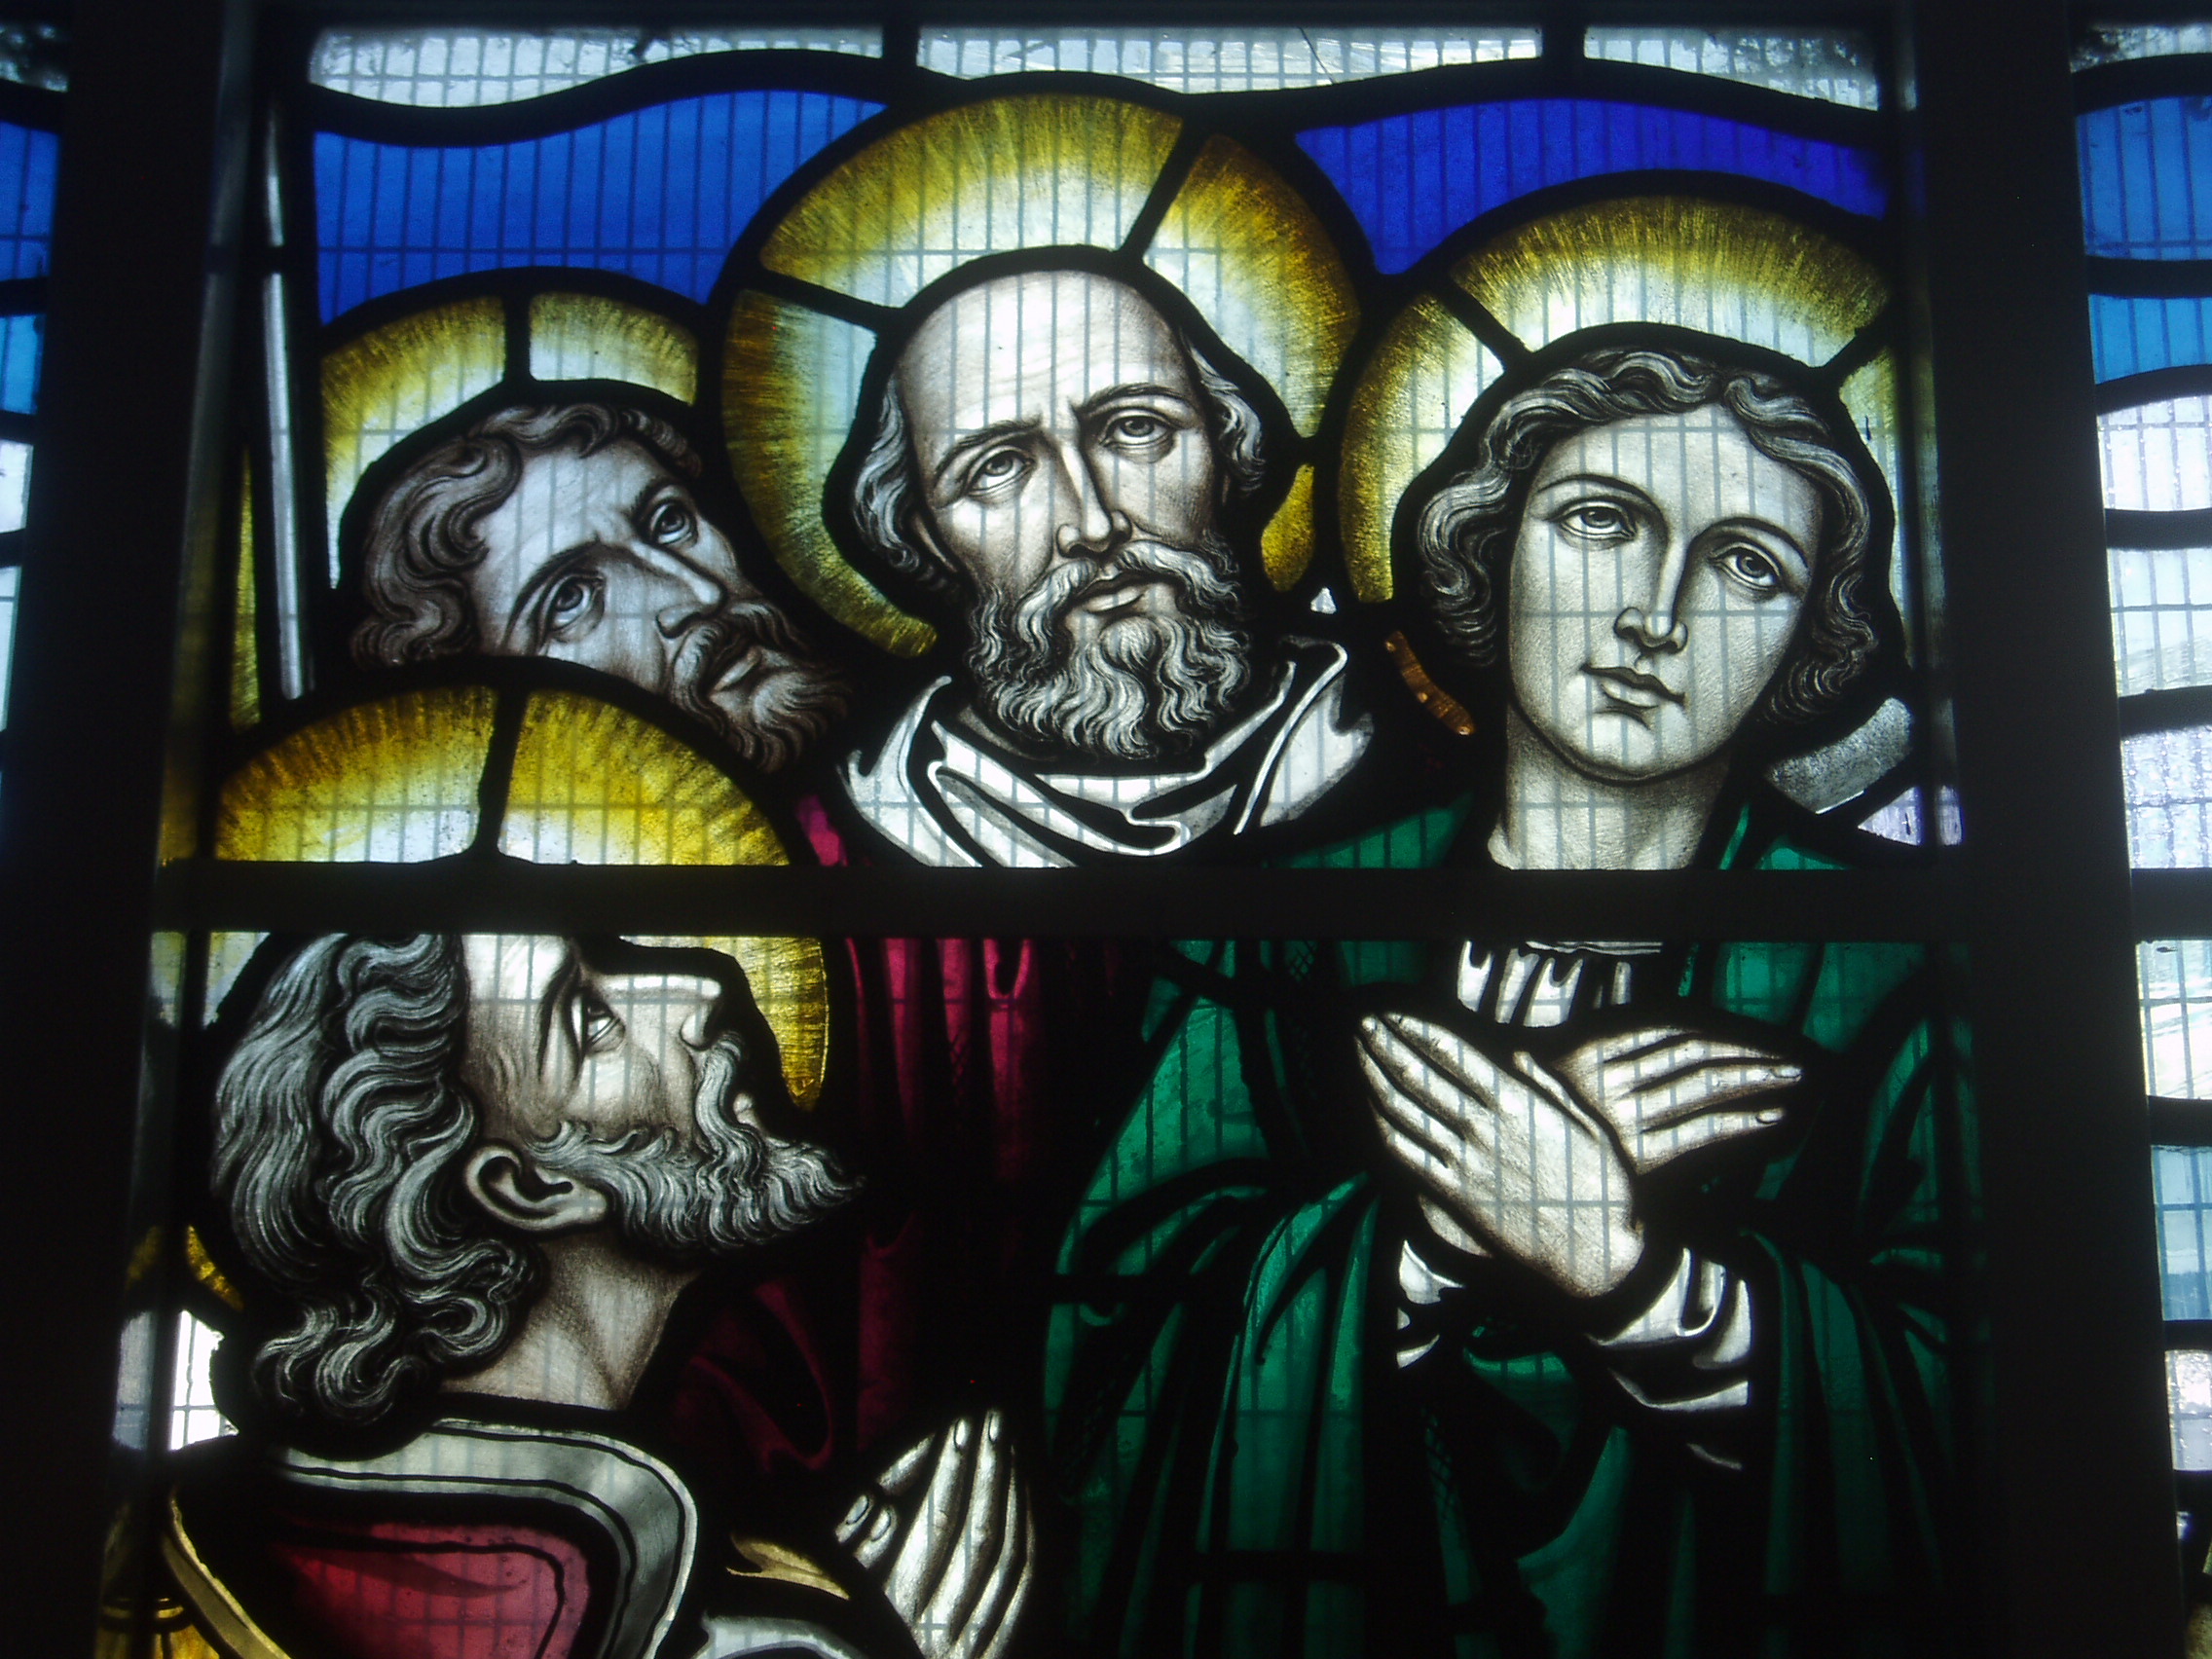 Apostles Stained glass by John Hardman Studios of Birmingham (later than the glass in the main church, closer to c1930) salvaged from the previous church and worked into a new richly coloured abstract setting by the same studio when the church was replaced by a modern building in the 1960s. St Catherine's Roman Catholic church was opened in 1965, having been designed by Harrison & Cox to replace a nearby Victorian structure that was sacrificed to make way for the city's inner ring road in 1961. The church is a major landmark overlooking the A38 leading into the heart of the city, but one I'd never been able to get into until attending a Sunday mass. The internal space is impressive, and somewhat difficult to photograph. It is very much a post Vatican II church, the altar is centrally placed, but not quite in the round as the area behind is divided off to form a separate Lady chapel. The most striking feature for me however was the glass, much of it is salvaged from the previous church and typical Hardman's c1890s, but it has been adapted in a rather unique way with the figurative subjects isolated upon brightly coloured and clearly modern backgrounds to fill the spaces of much larger windows. The effect is far more successful than it might sound and the colour from the rich background glass (also by Hardman's!) really enlivens the interior. www.stcatherinesbirmingham.org/